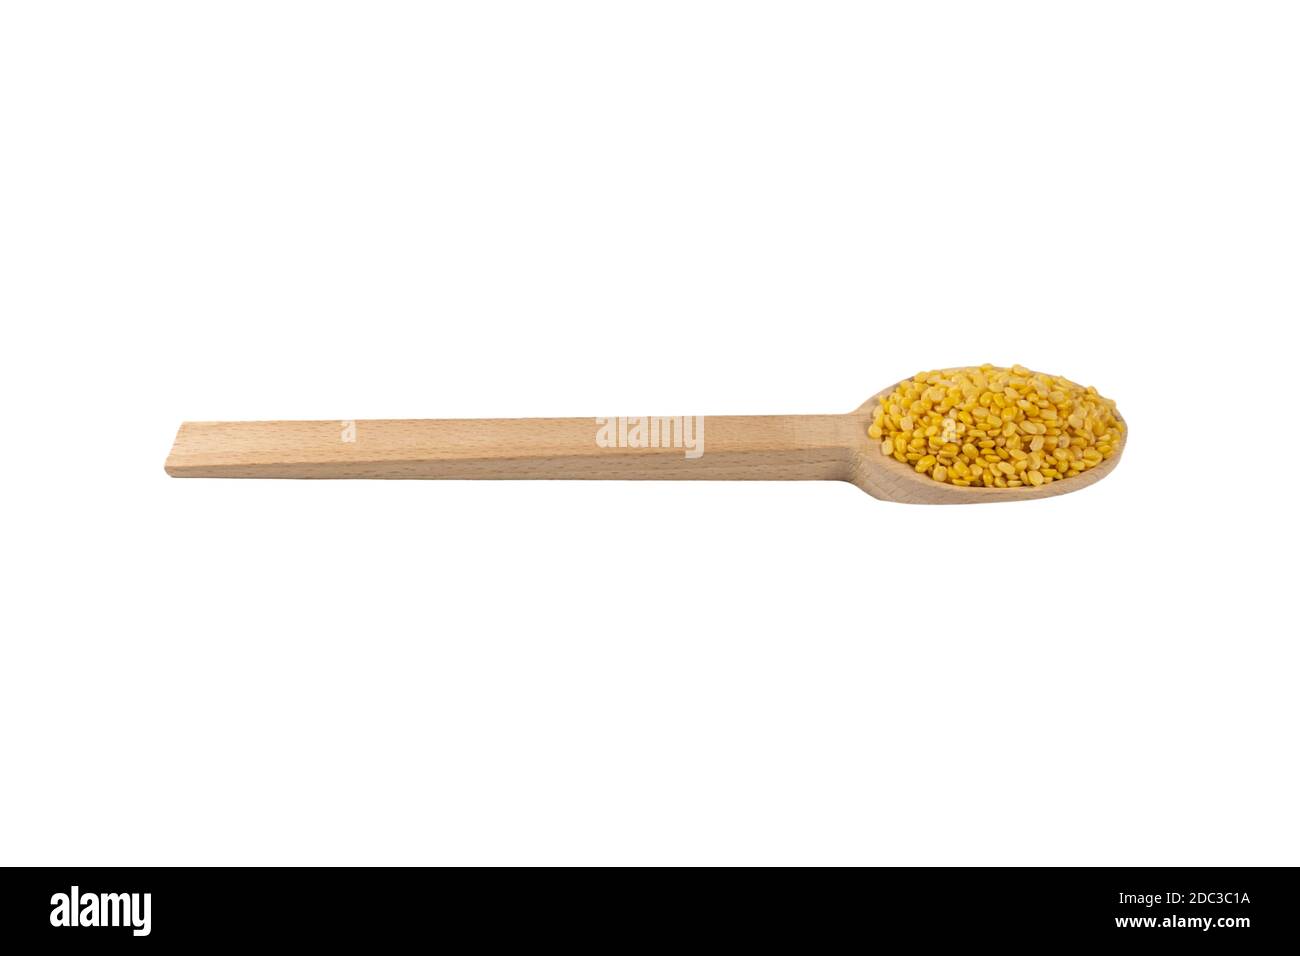 Mung dal or Mung daal bean on wooden spoon. nutrition. bio. natural food ingredient. Stock Photo